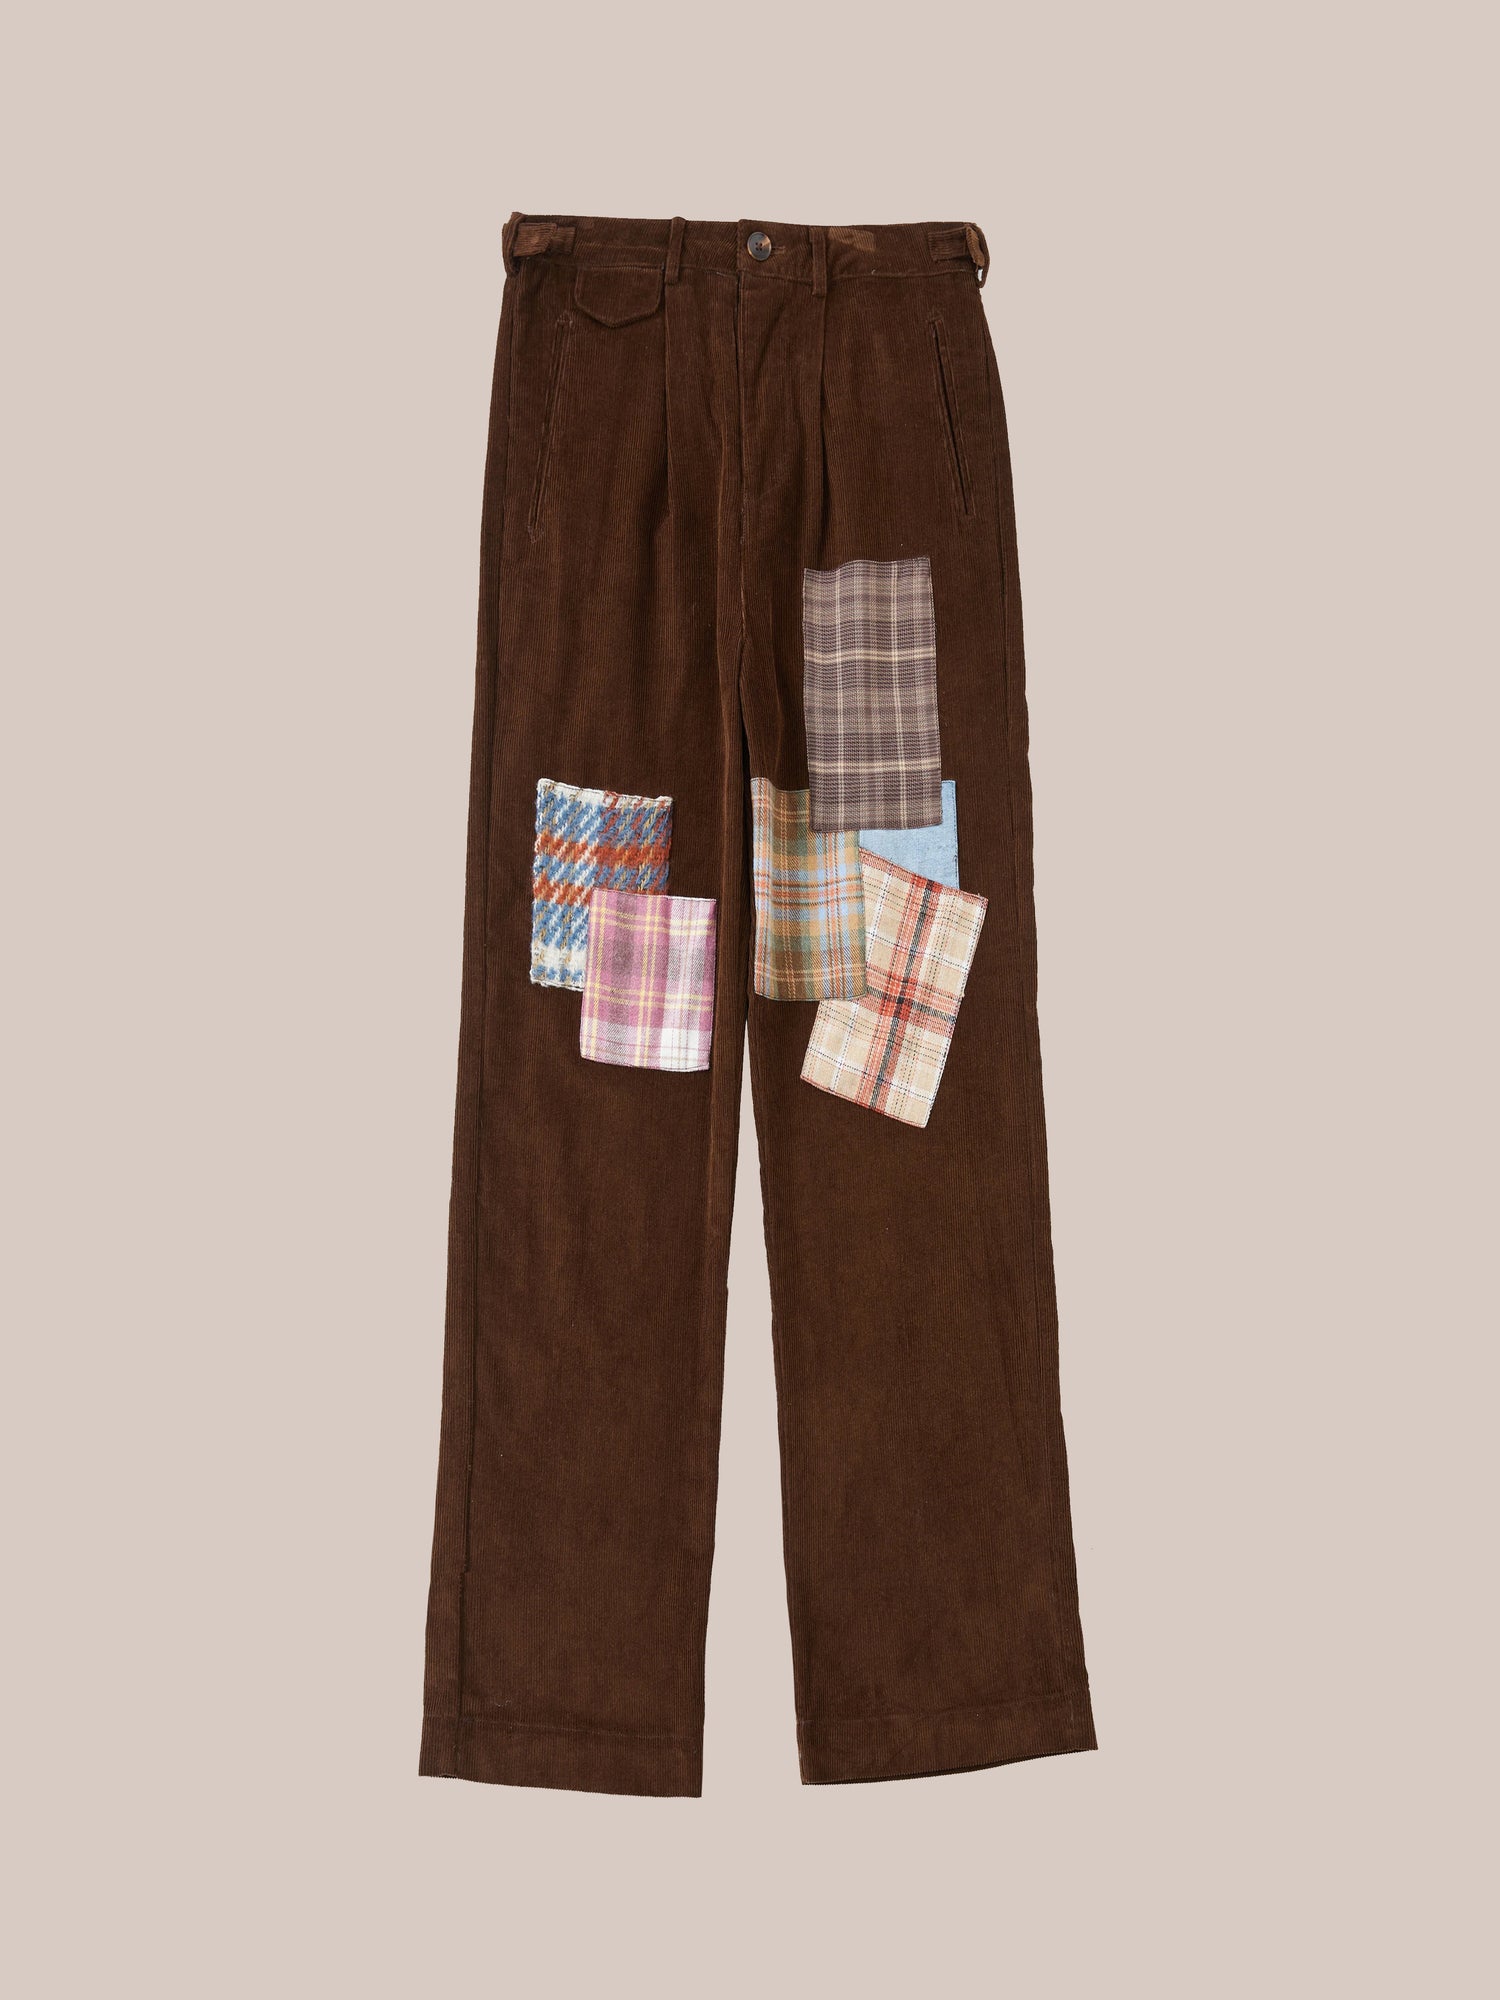 Brown corduroy pants with Found Multi-Plaid Patch details on the pockets against a light tan background.